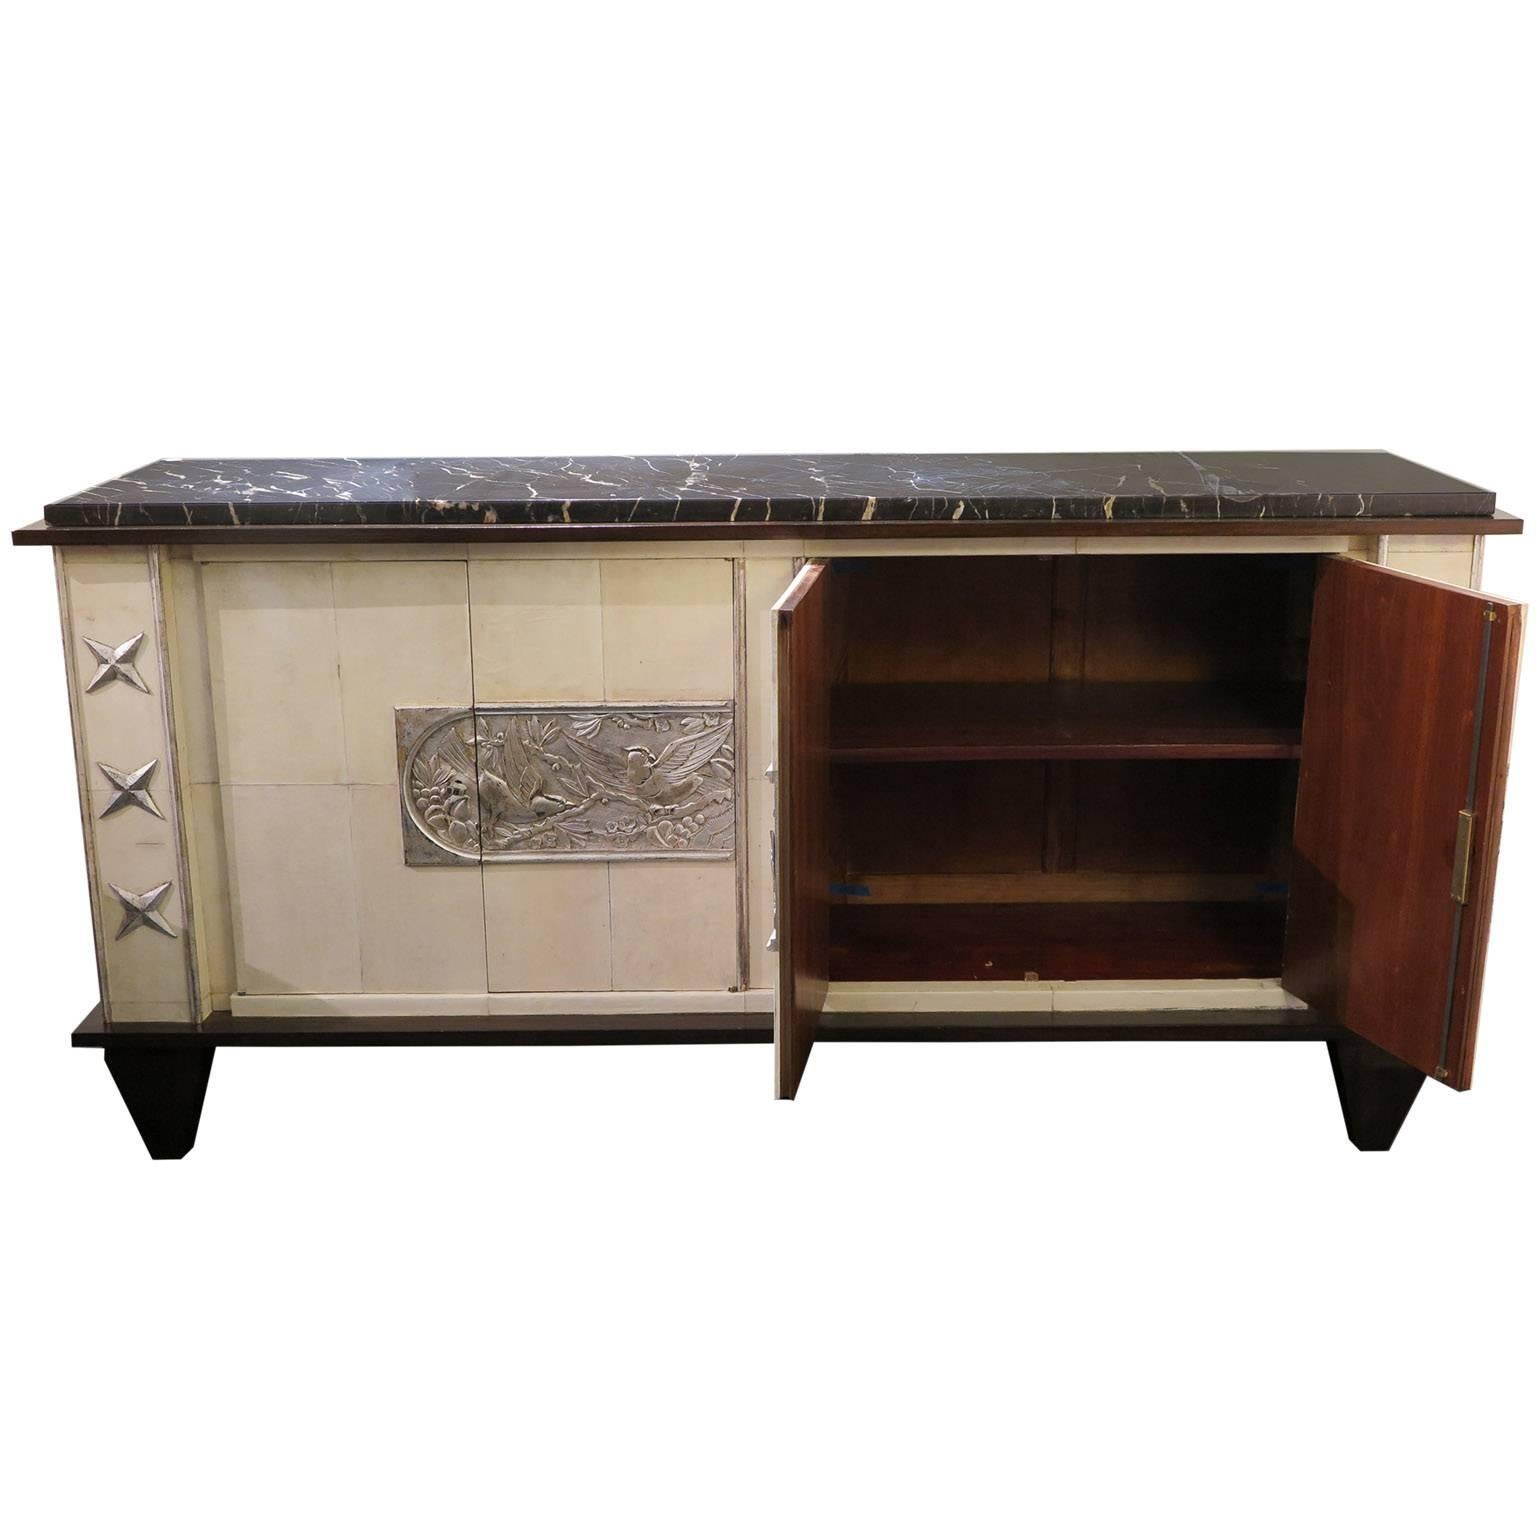 Art Deco Sideboard in Parchment with Silver Relief-Work, France, 1940s-1950s For Sale